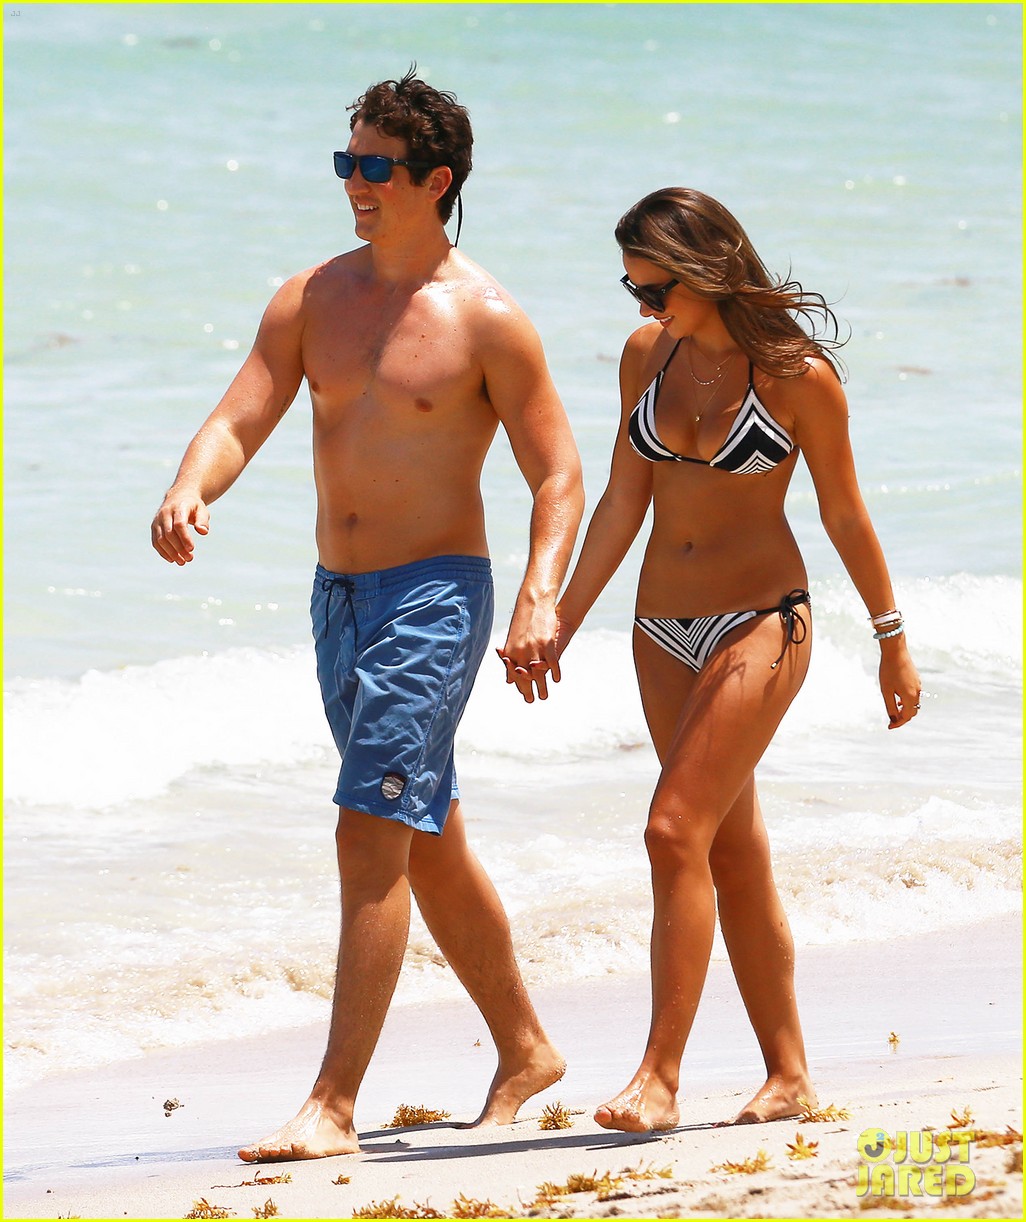 miles teller keleigh sperry continue their vacation 27